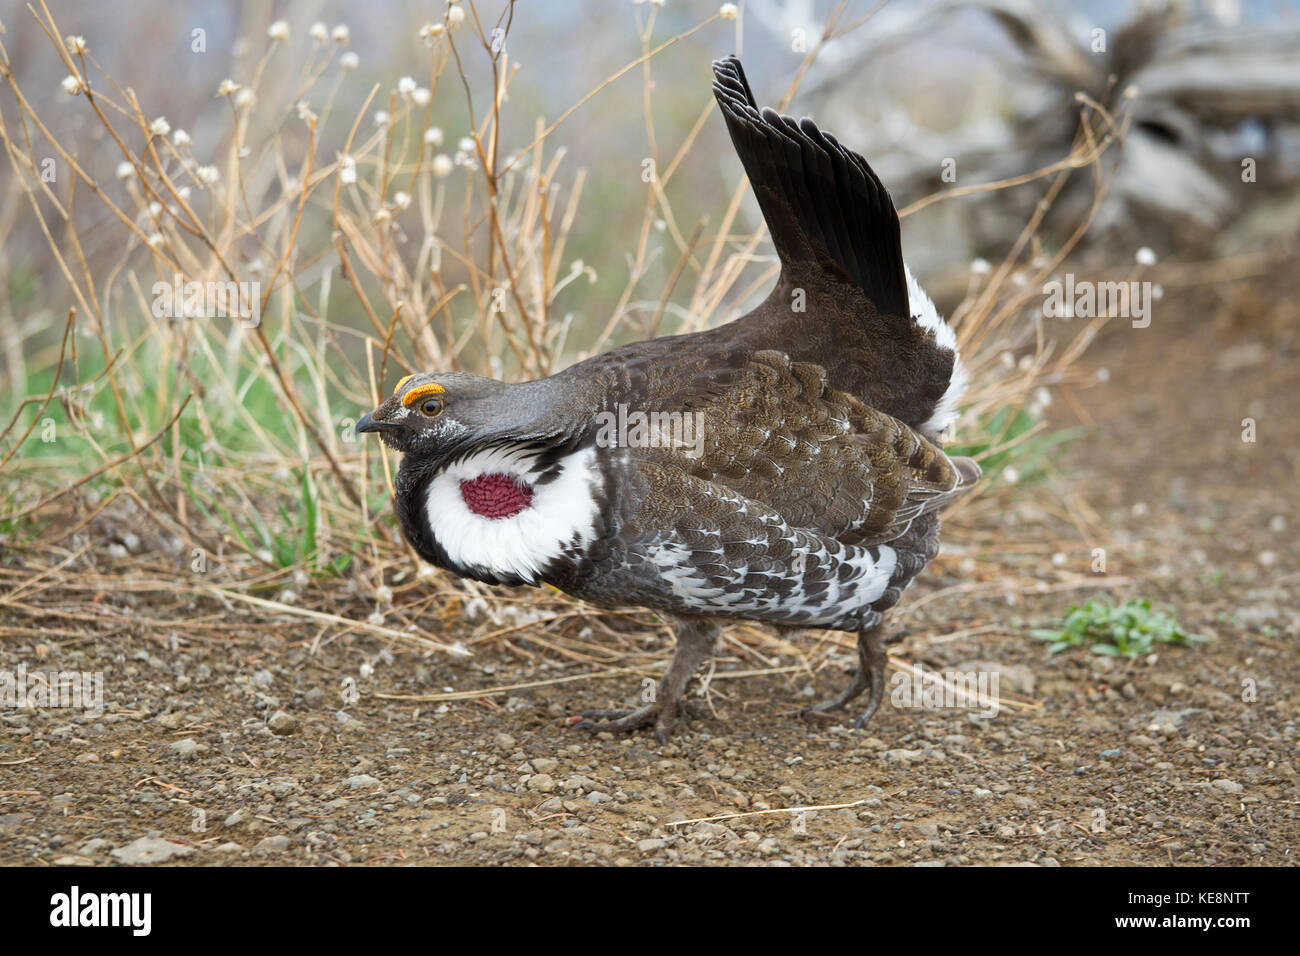 Blue or Dusky grouse during mating season in Yellowstone National Park Stock Photo